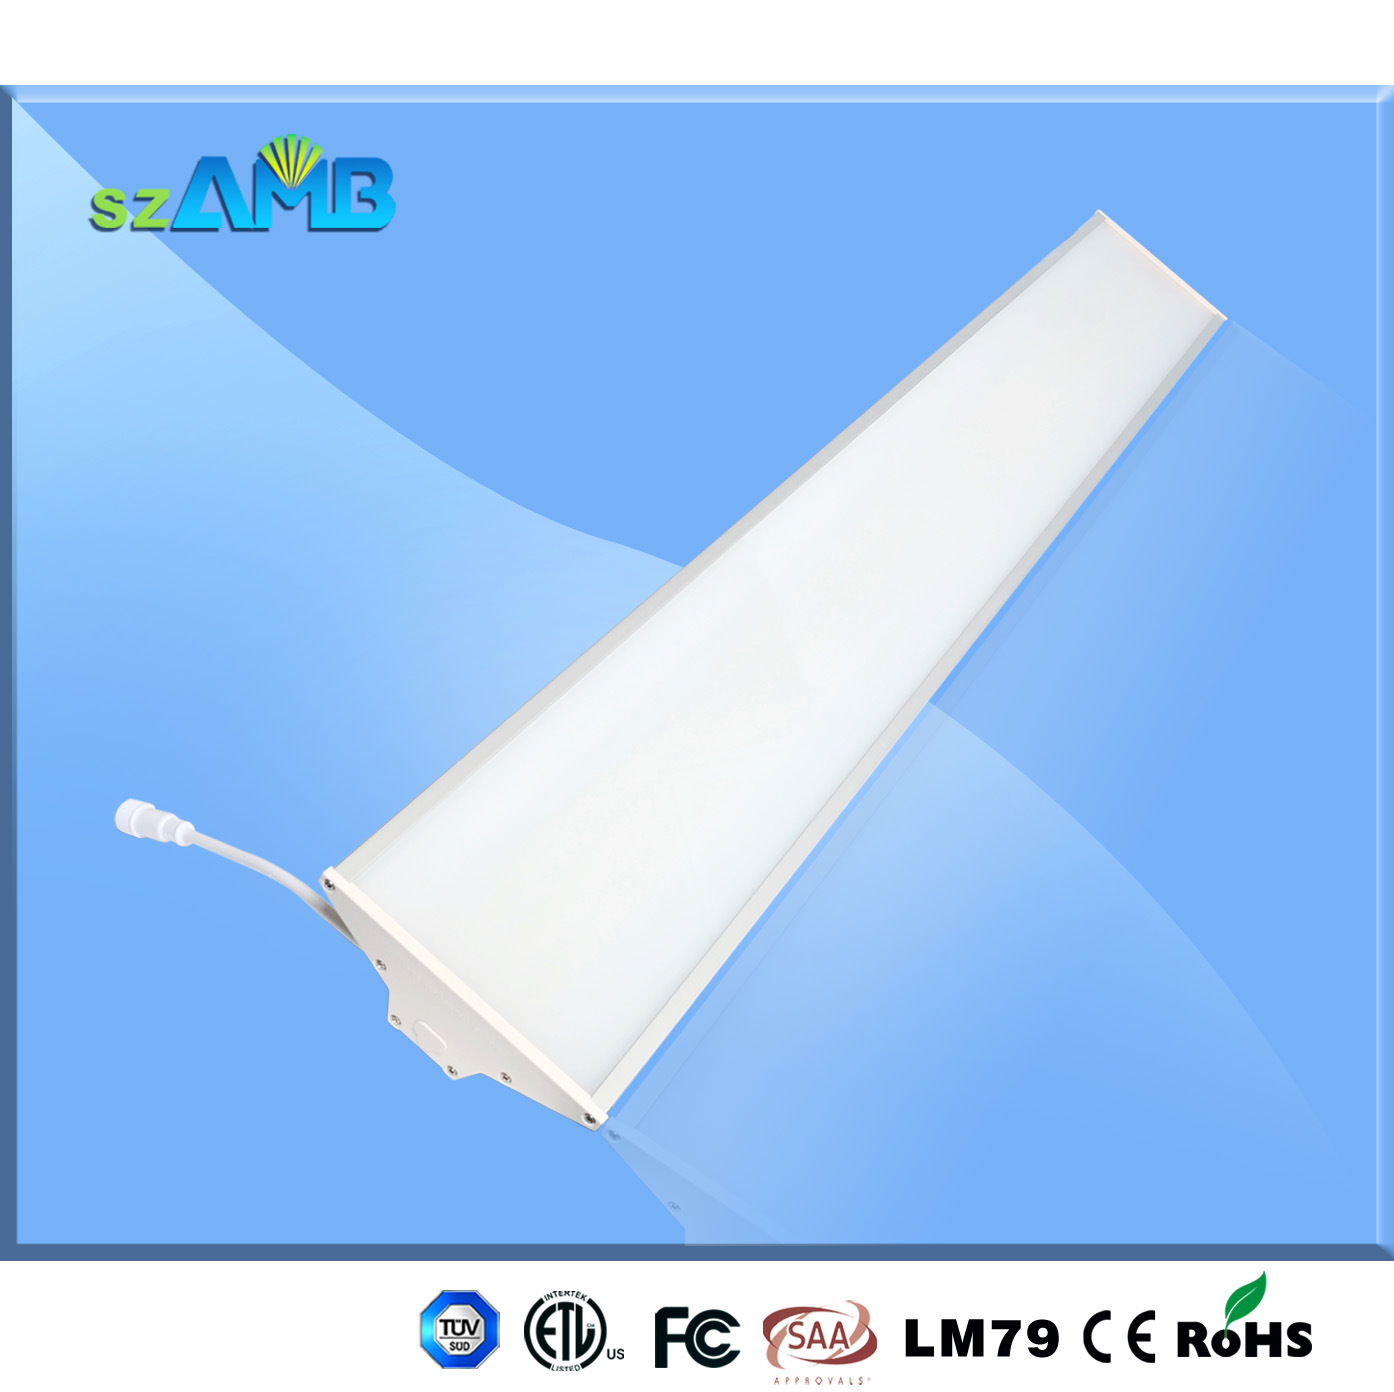 45W 105lm/W LED Panel Light with IP65